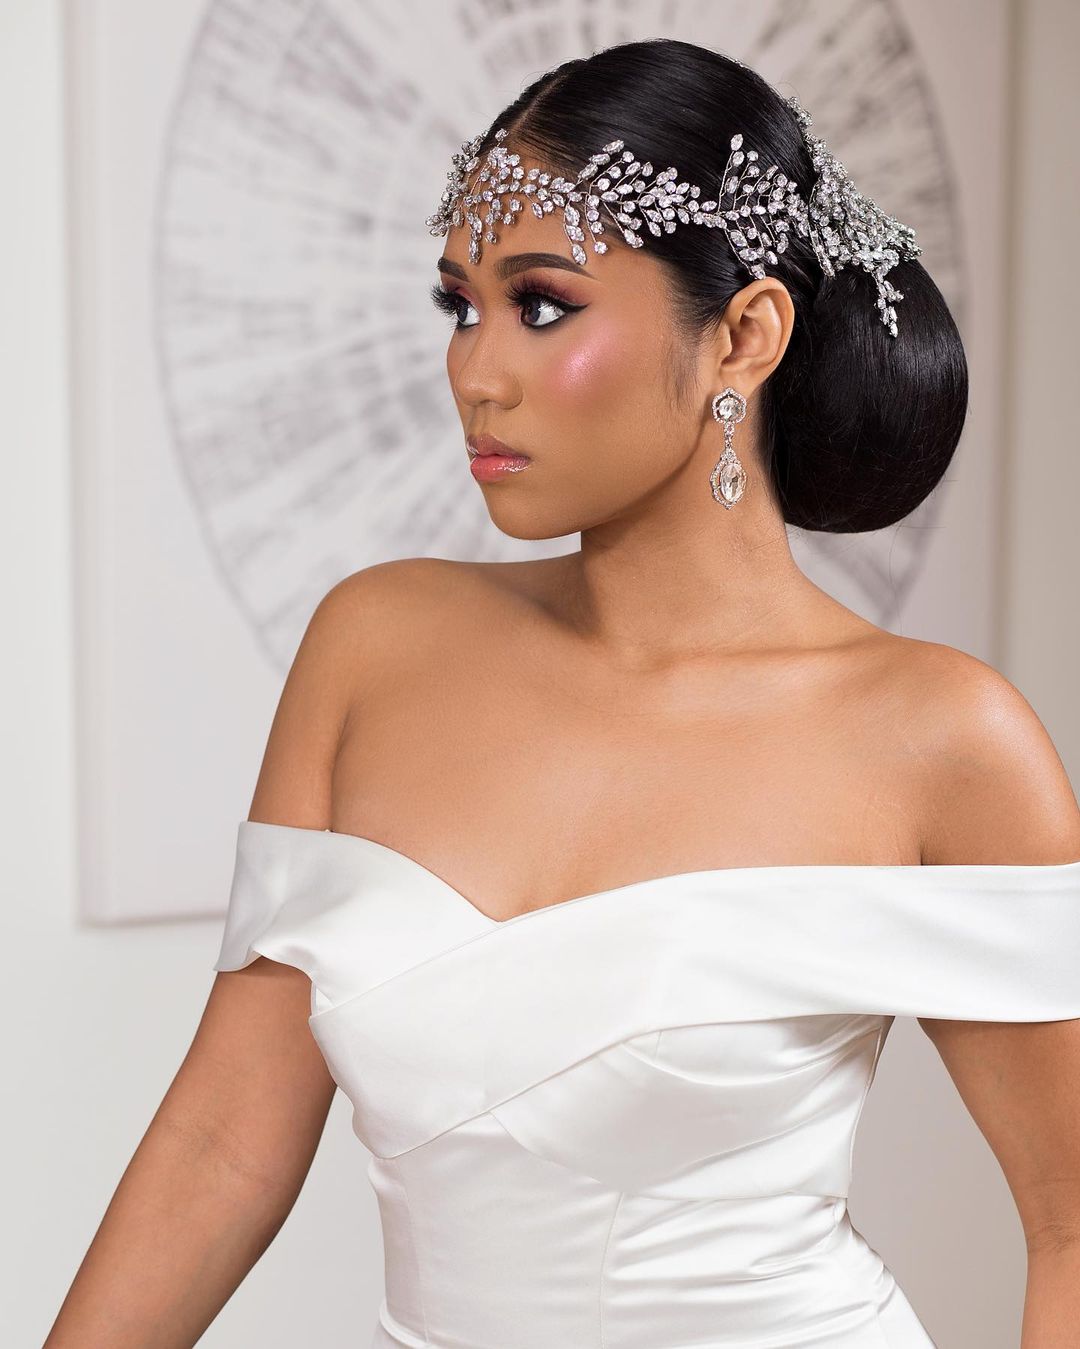  Bridal Beauty Look Is A Classic For Your Big Day 